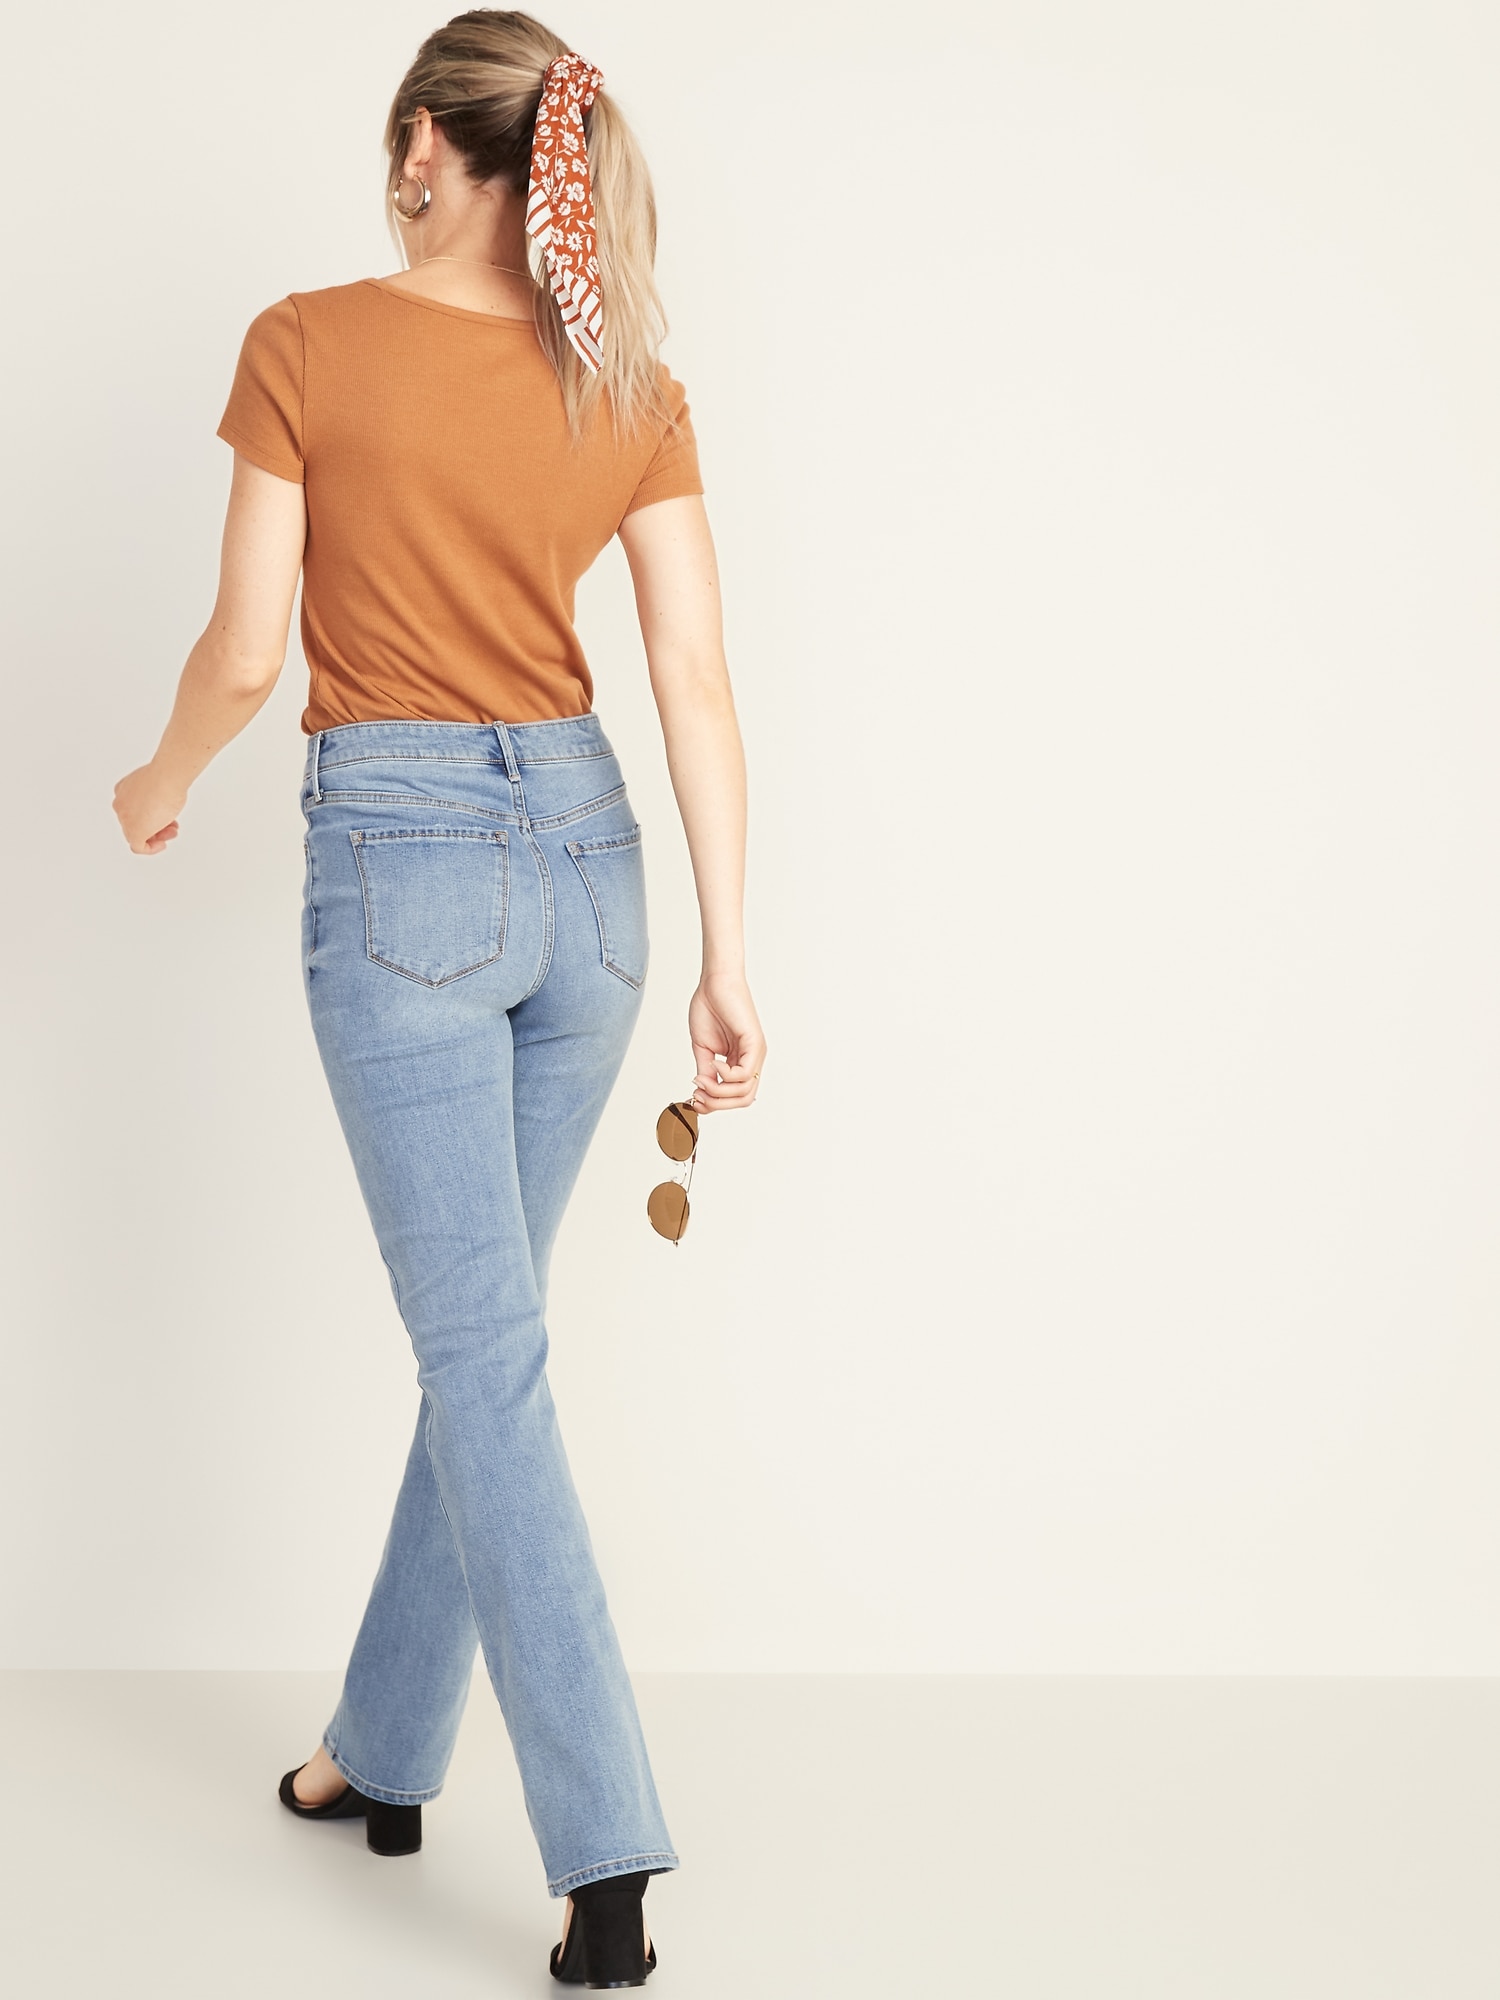 old navy bootcut jeans womens